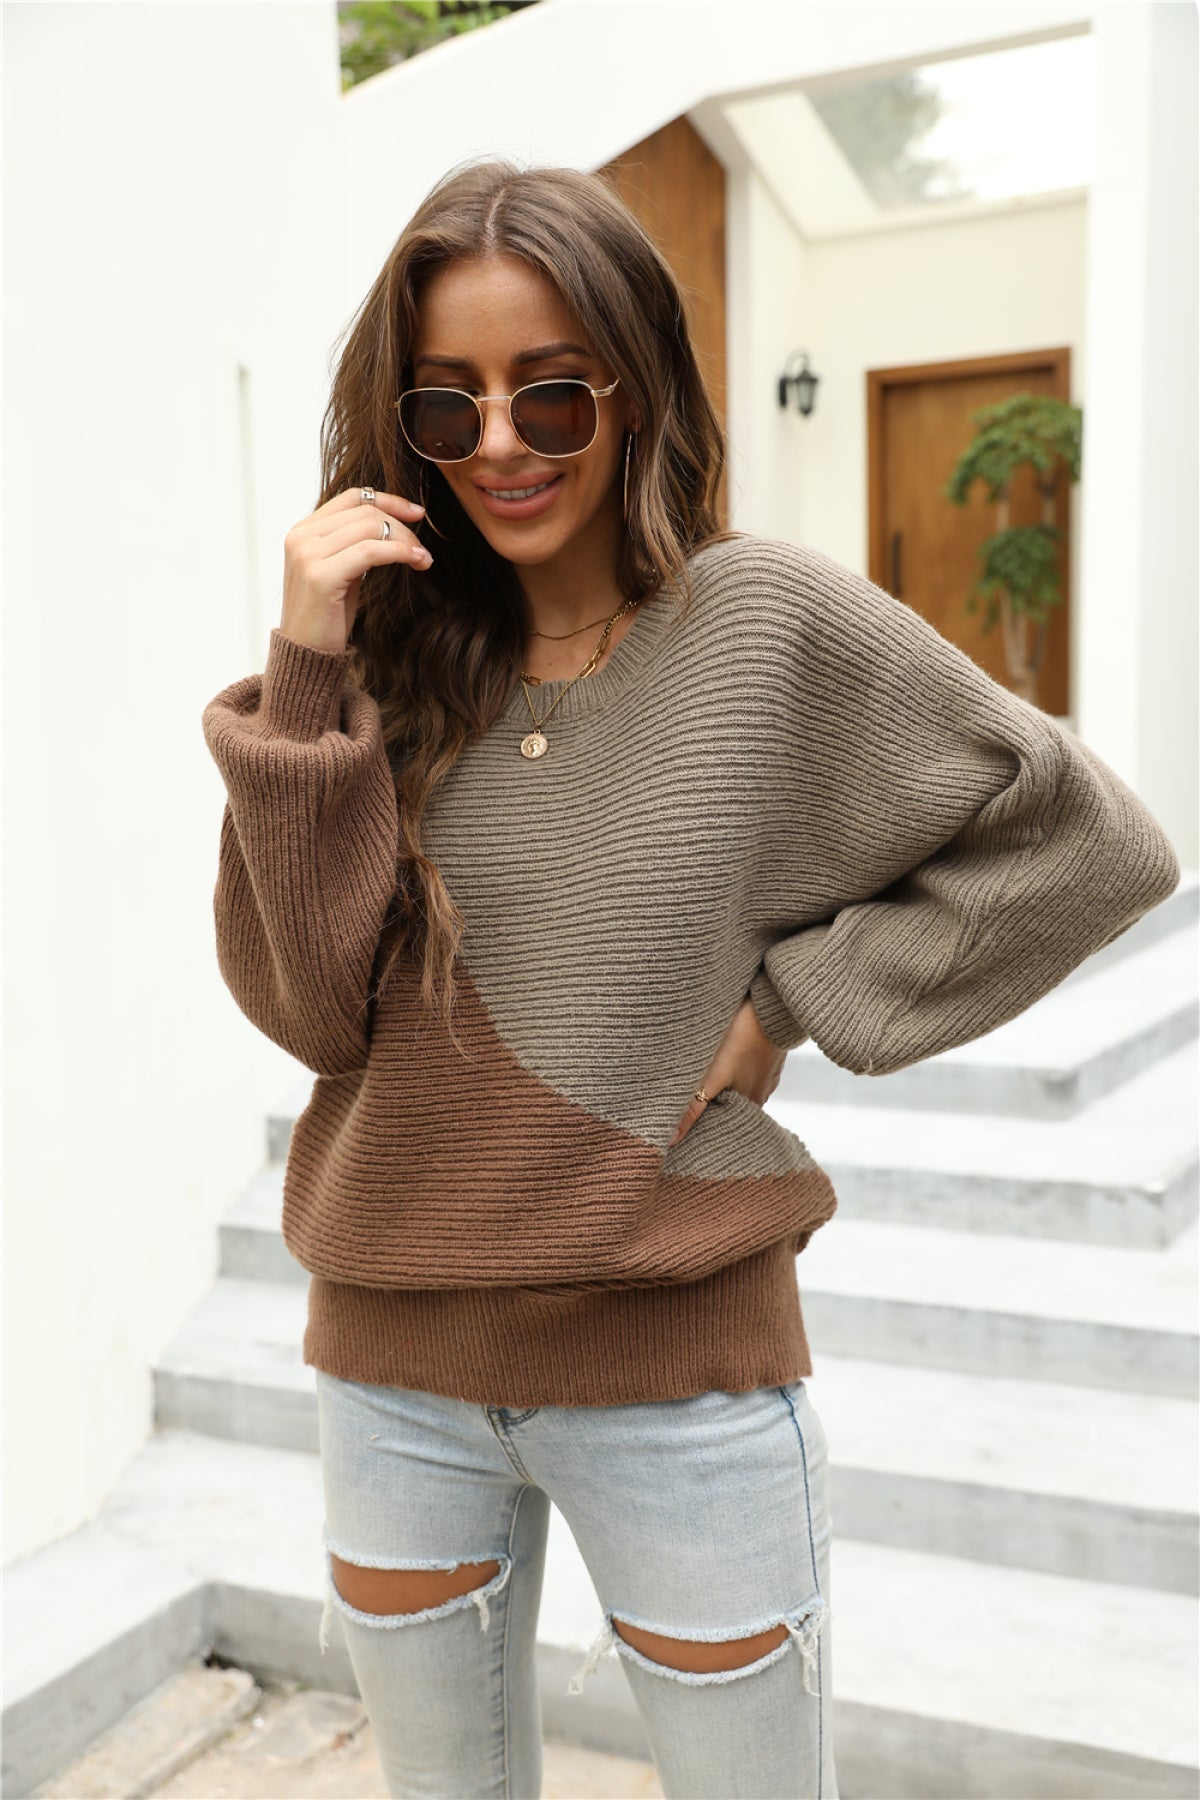 Knitted Batwing Long Sleeve Colorblock Sweaters